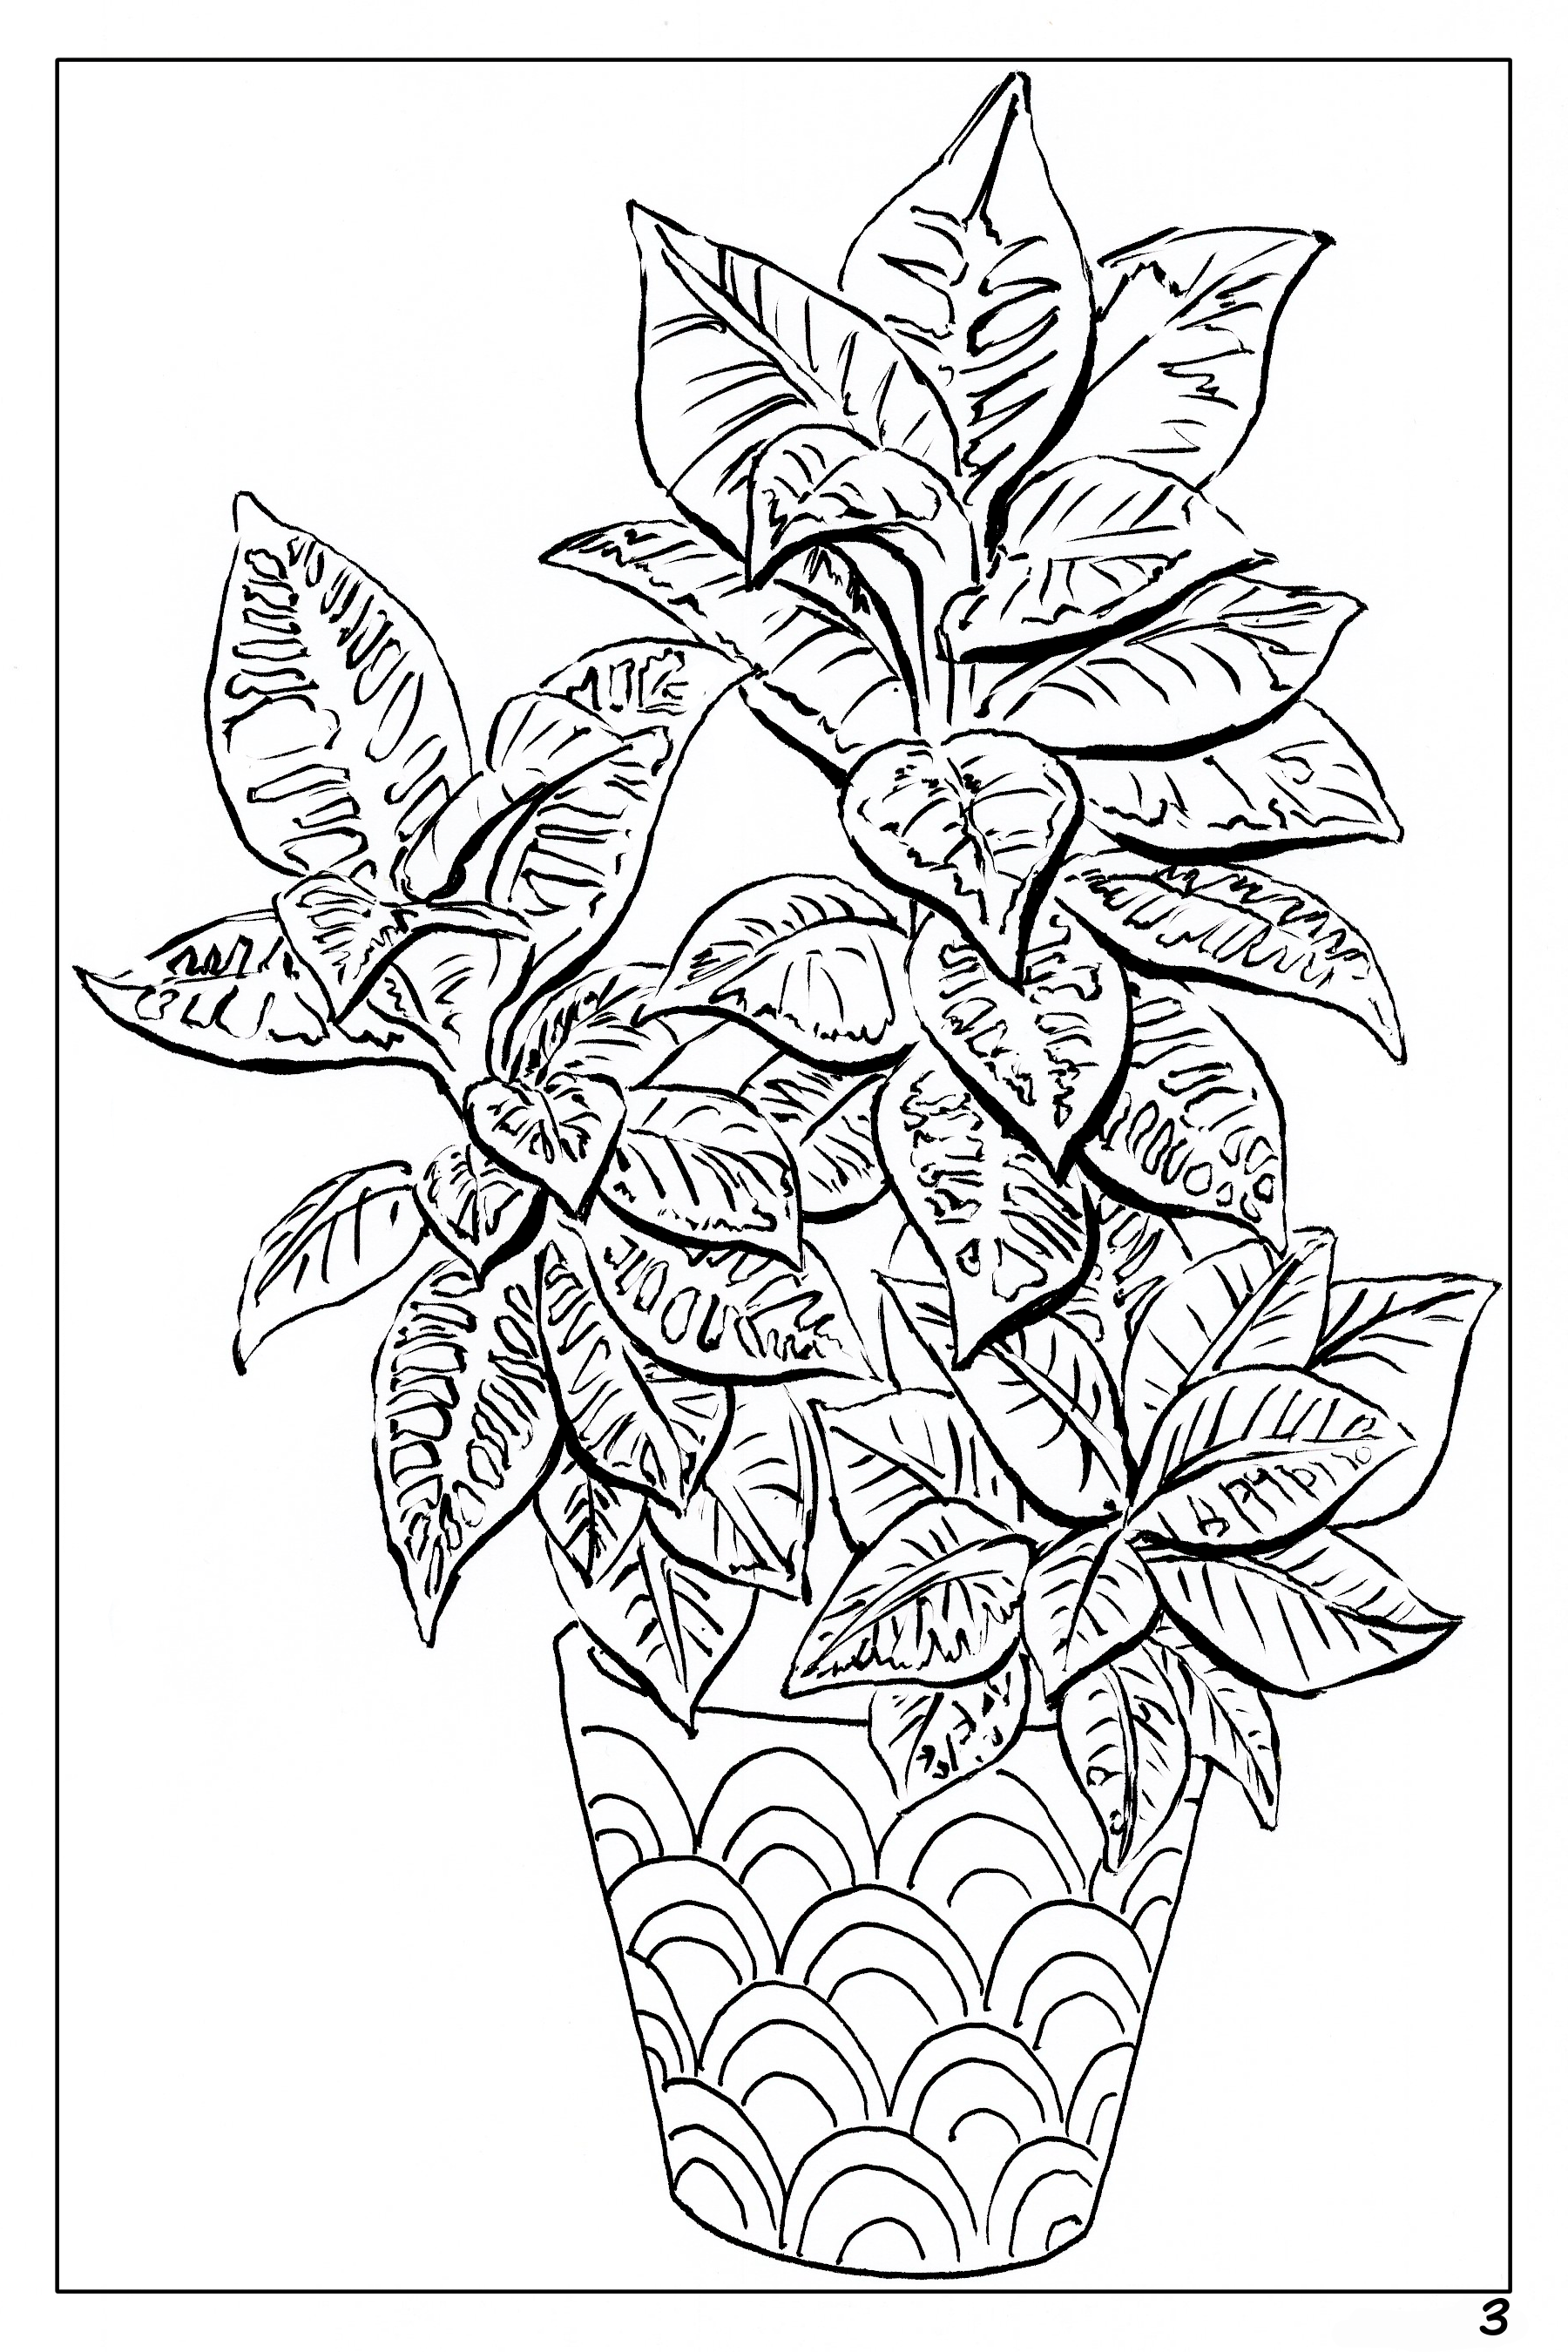 Plants and Flowers themed watercolor coloring book – Wondering Watercolor